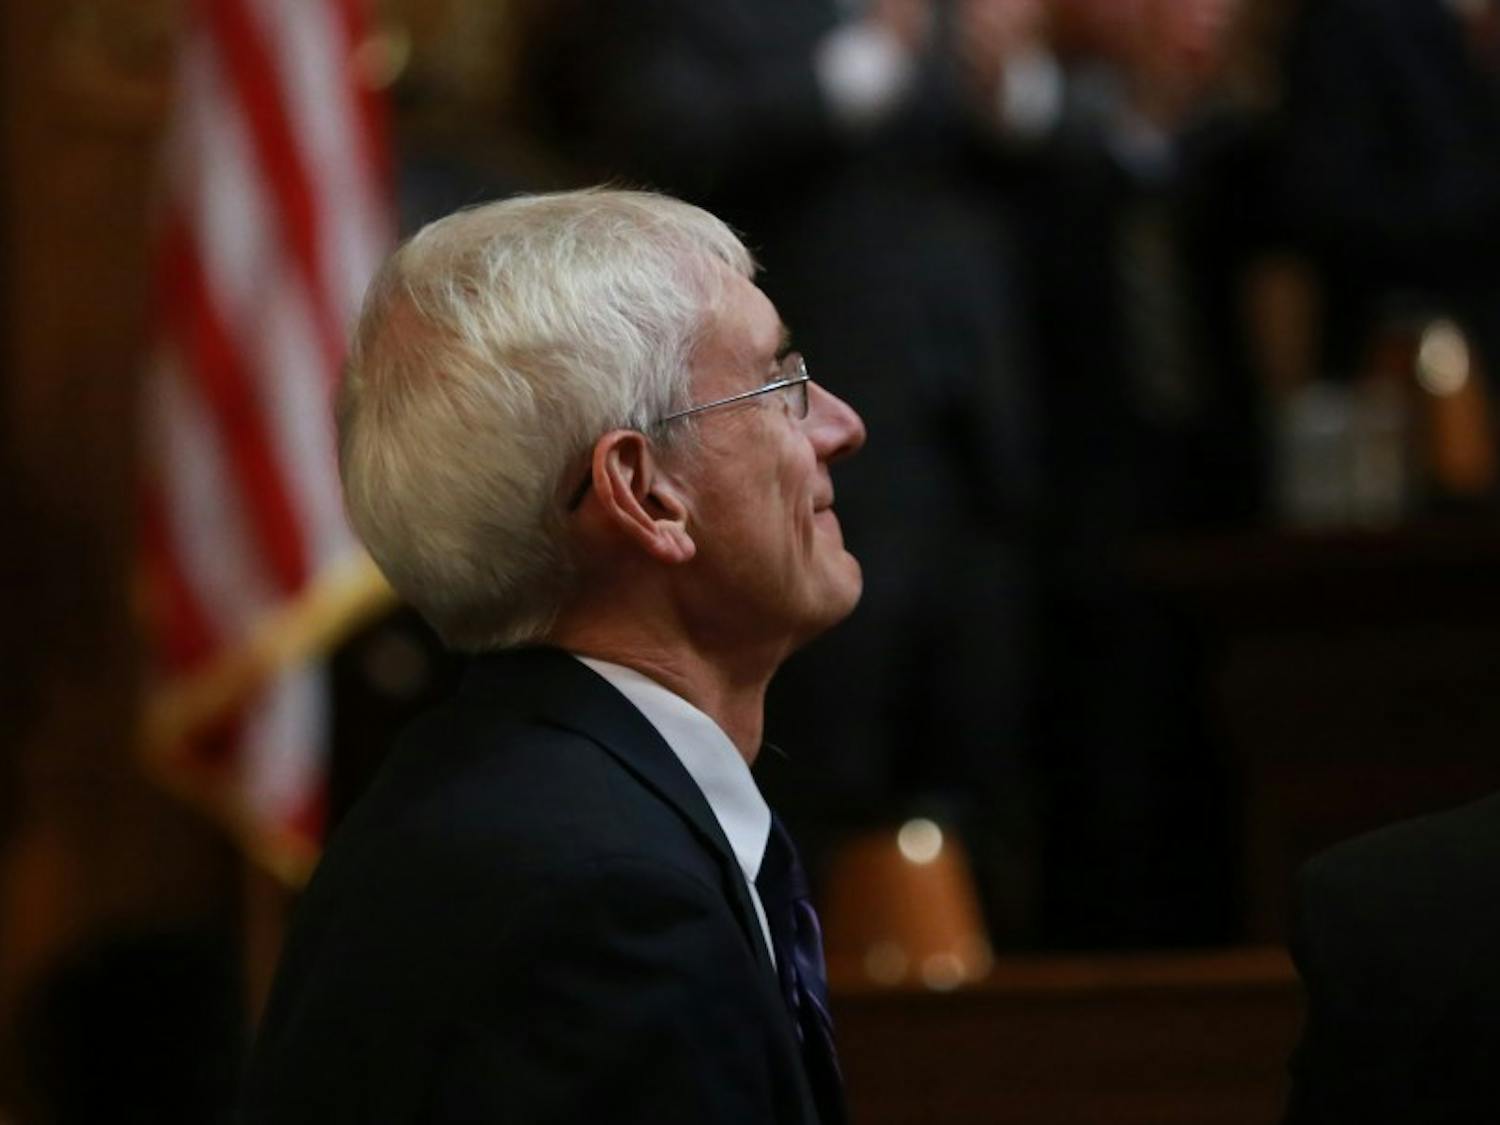 State superintendent and Democratic gubernatorial candidate Tony Evers says he doesn’t want state Attorney General Brad Schimel representing him in a lawsuit.